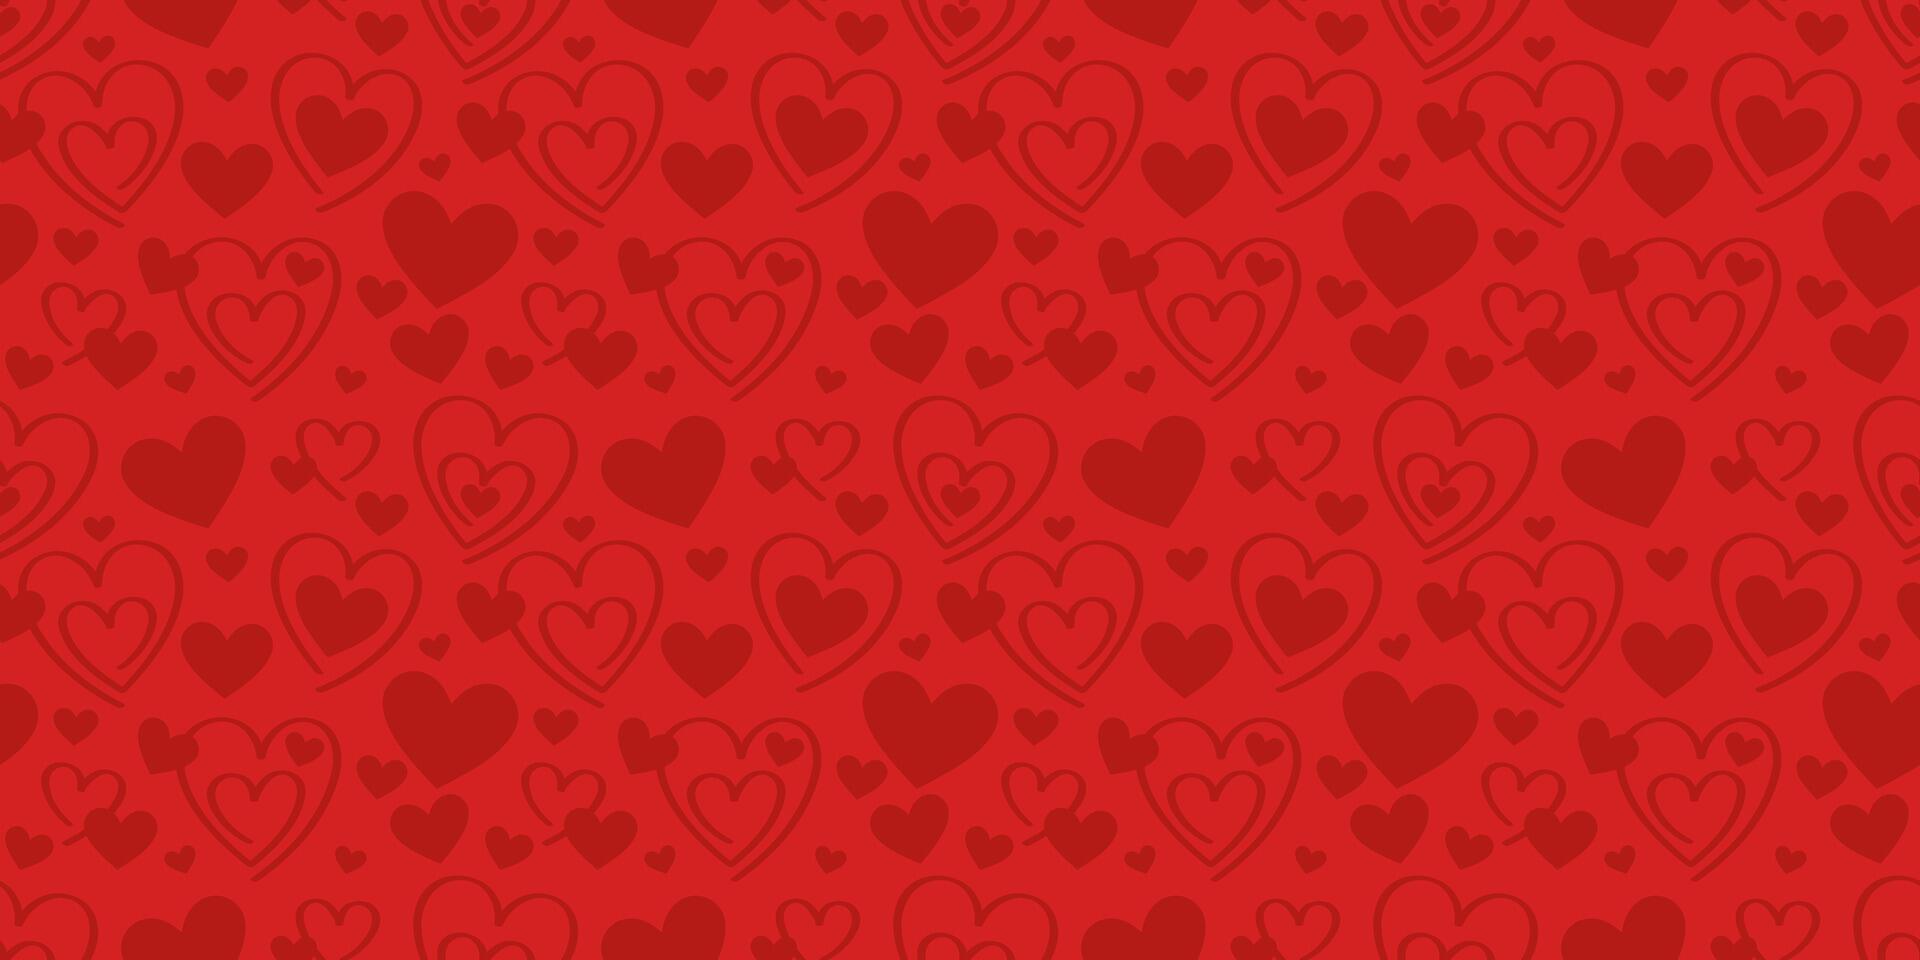 Red valentine day heart pattern background, seamless repeating vector texture, holiday wallpaper design